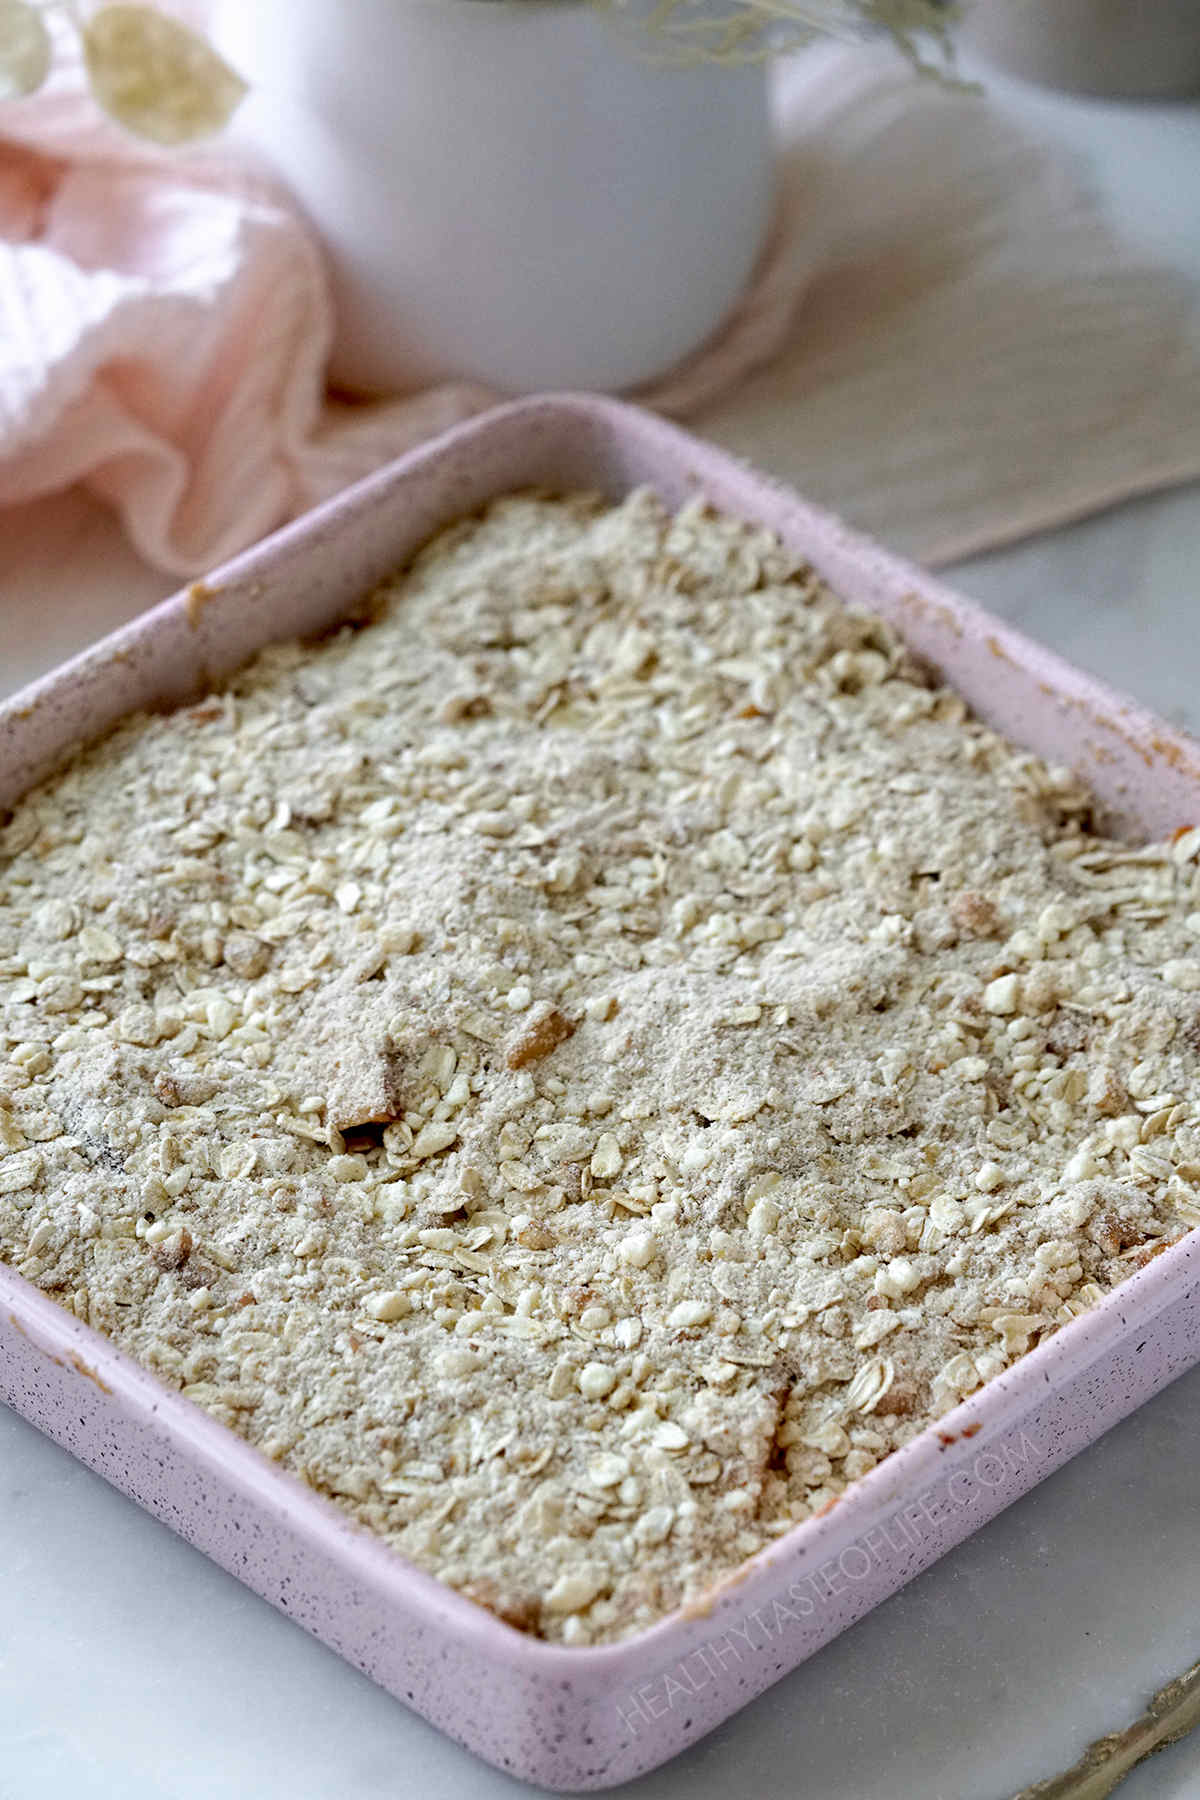 Oat crumble topping used for crisps and crumble recipes.  Just sprinkle this oat topping on any crumble.